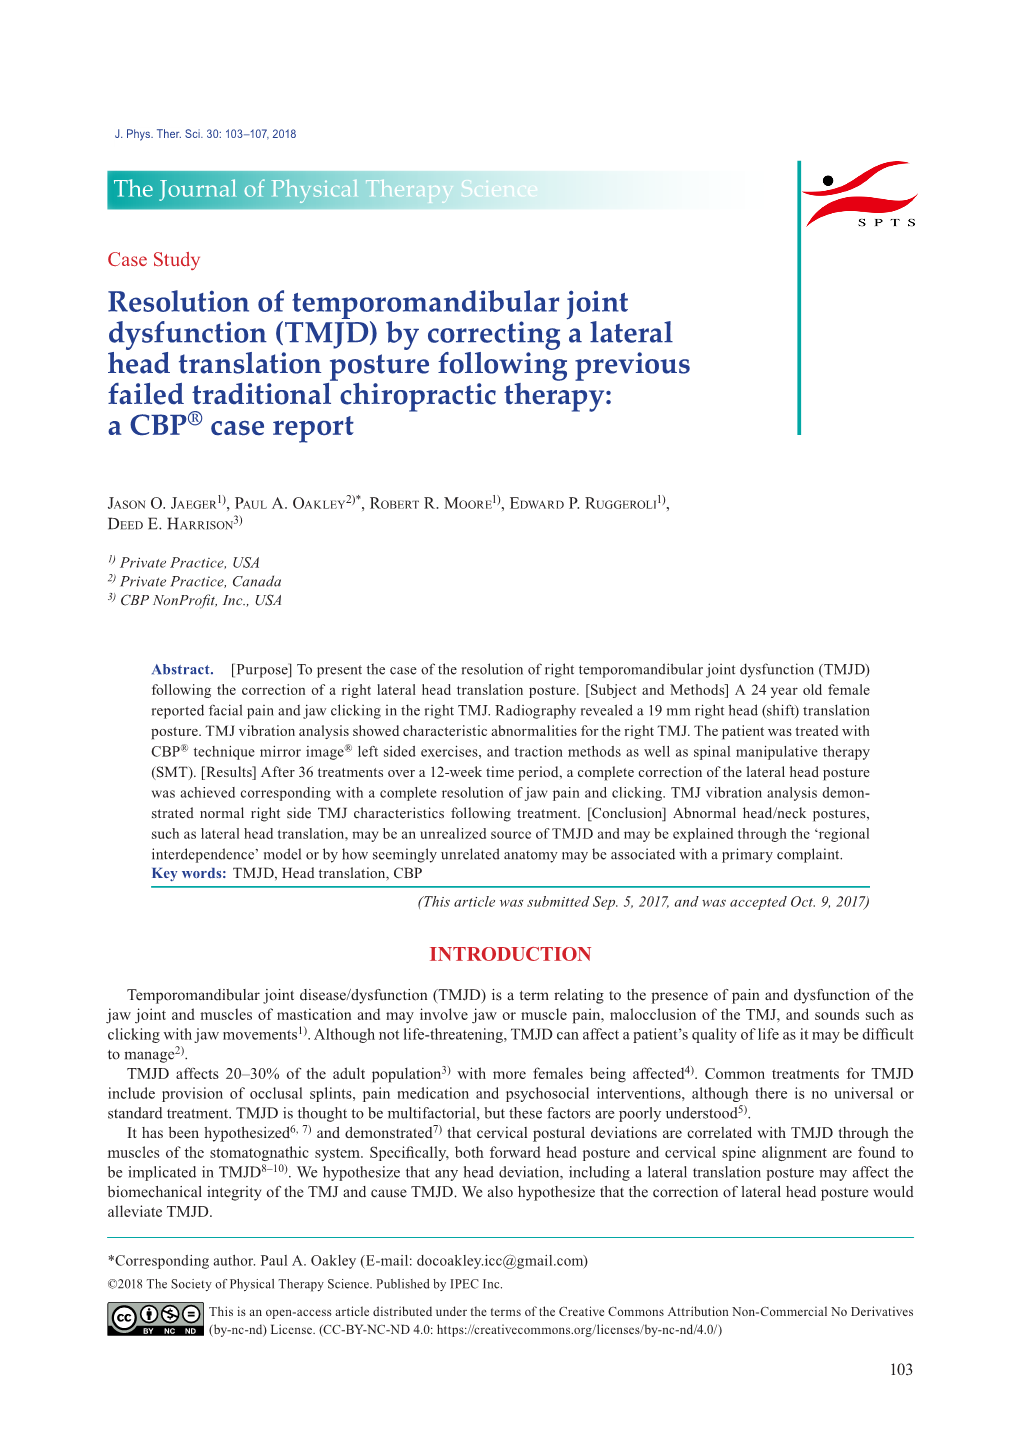 By Correcting a Lateral Head Translation Posture Following Previous Failed Traditional Chiropractic Therapy: a CBP® Case Report